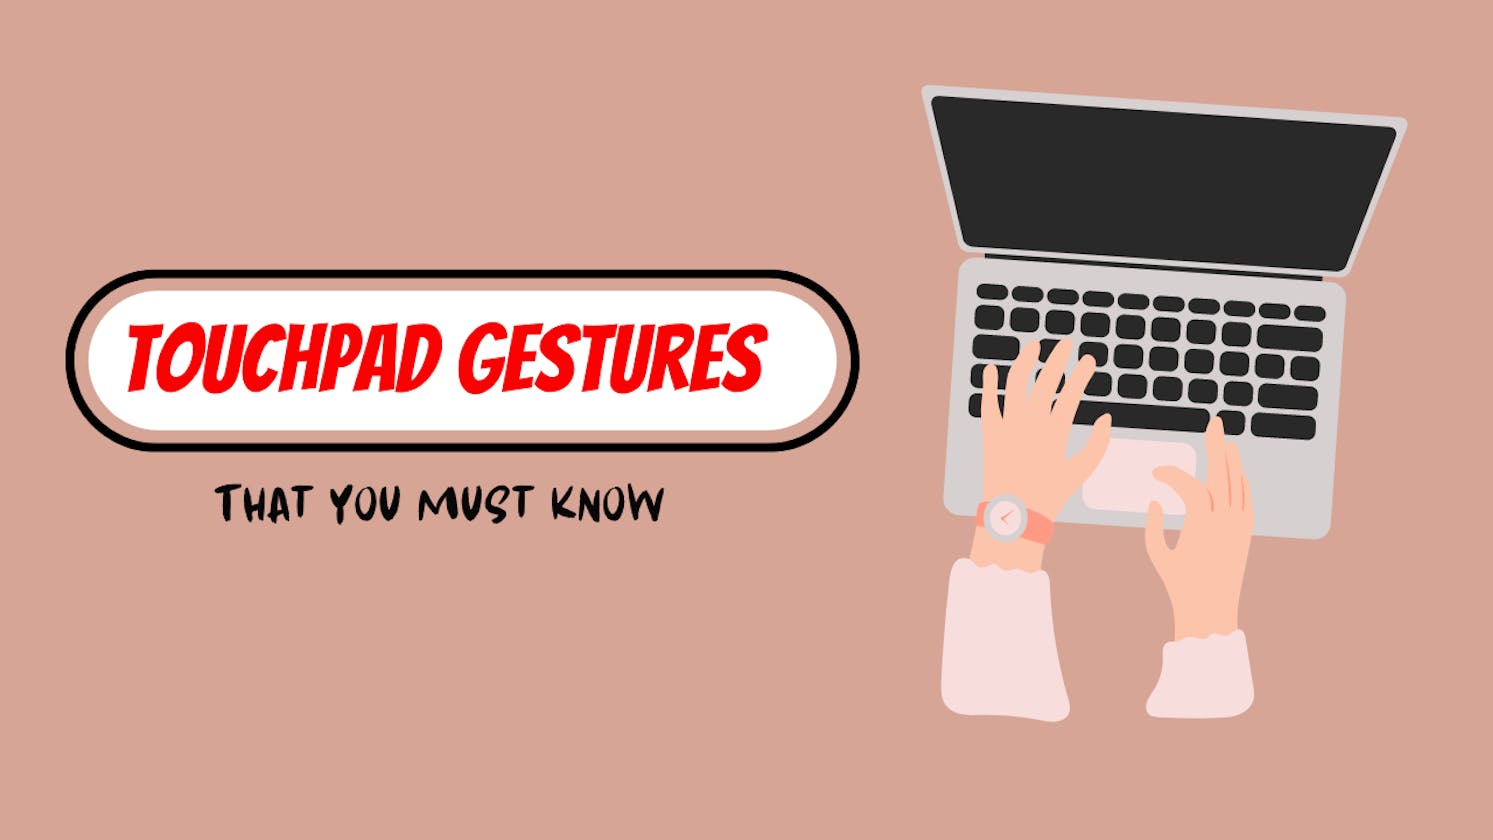 Laptop Touchpad Gestures That Everyone Must Know